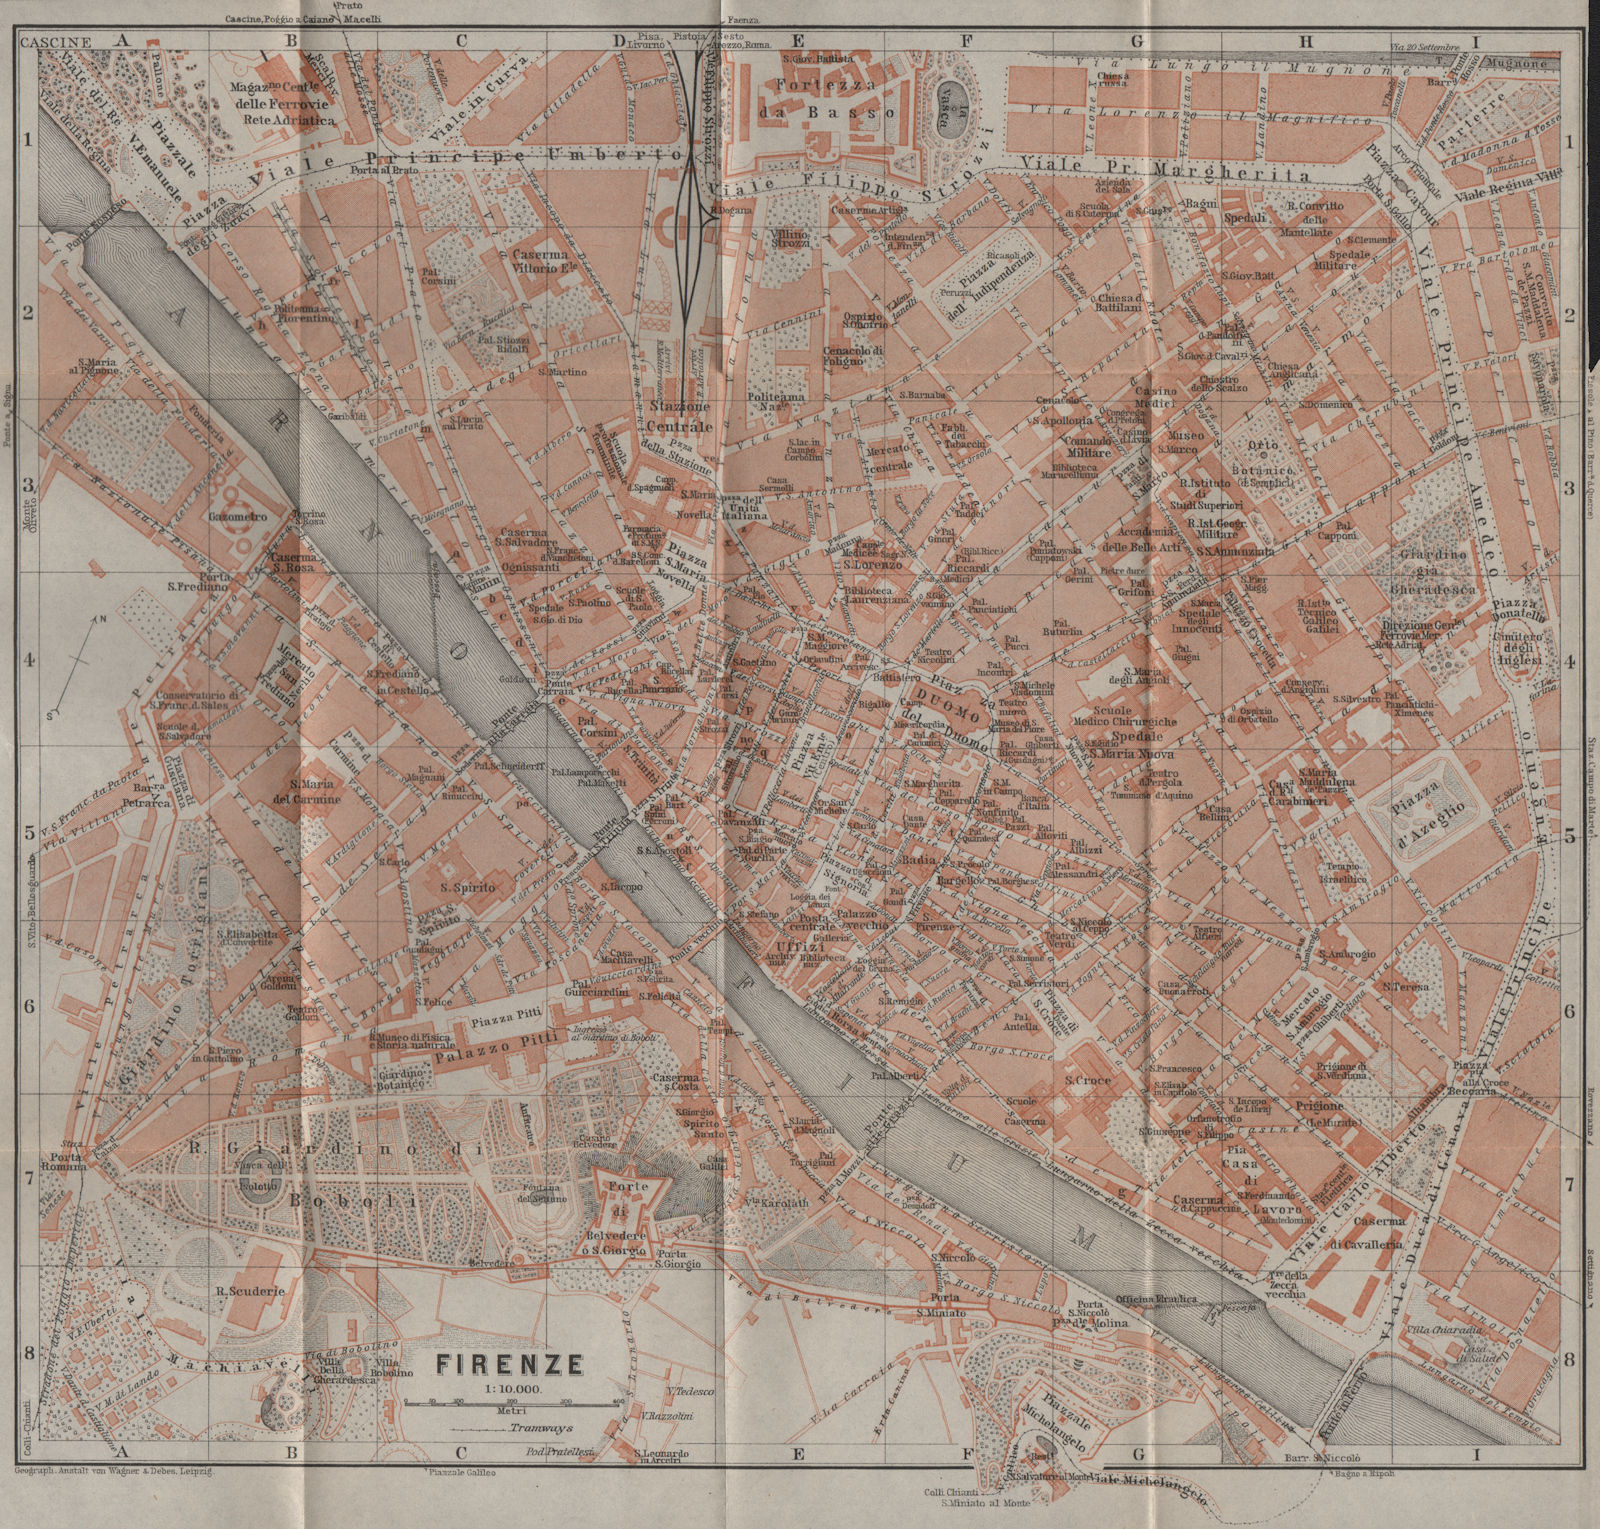 Associate Product FIRENZE FLORENCE antique town city plan piano urbanistico. Italy mappa 1909